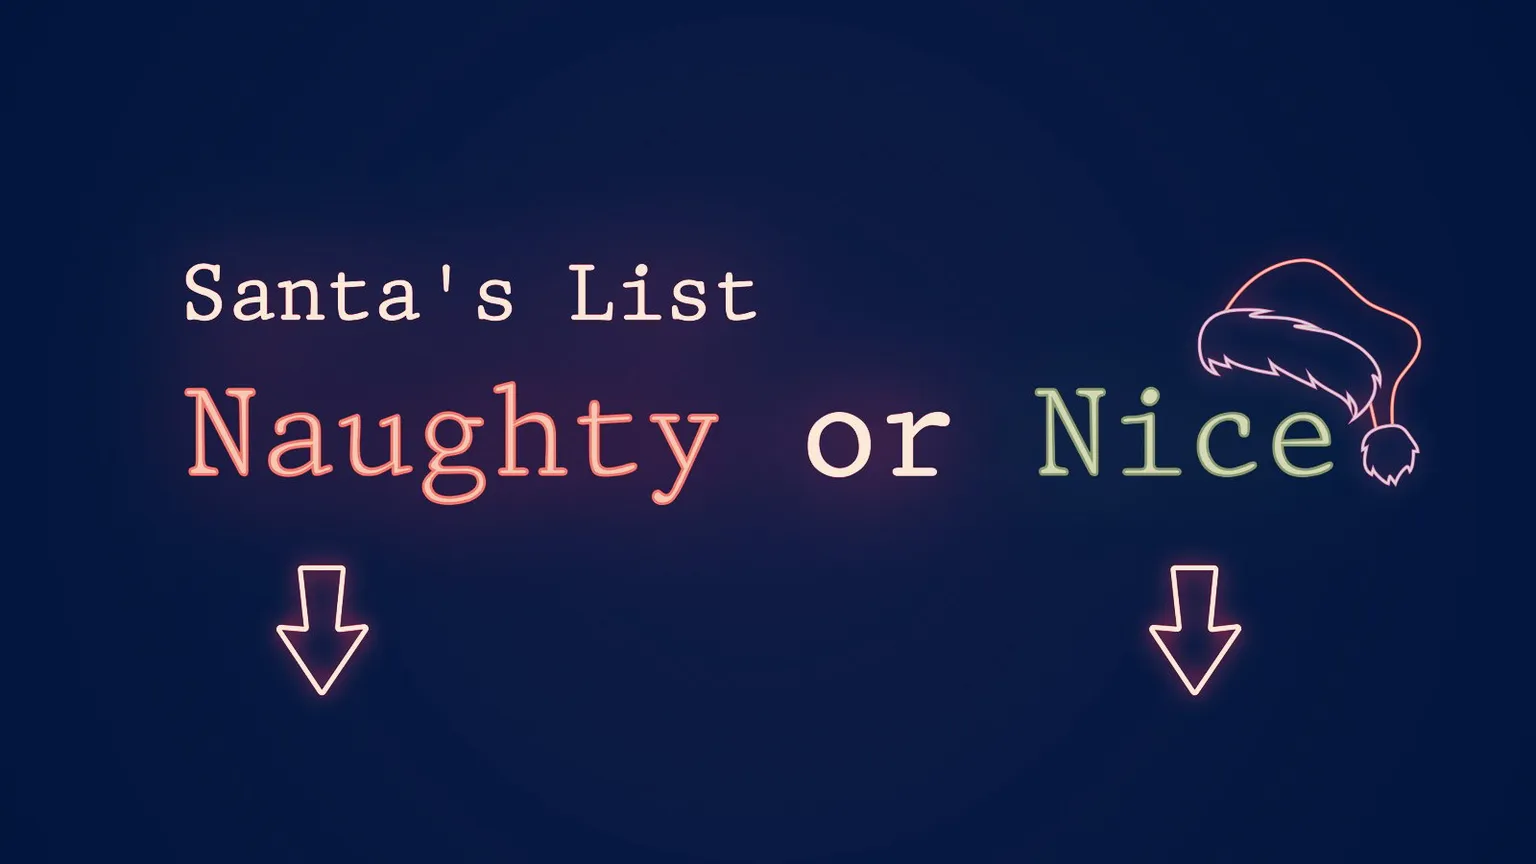 Crypto Santa's Naughty or Nice List for 2020. Image: Shutterstock